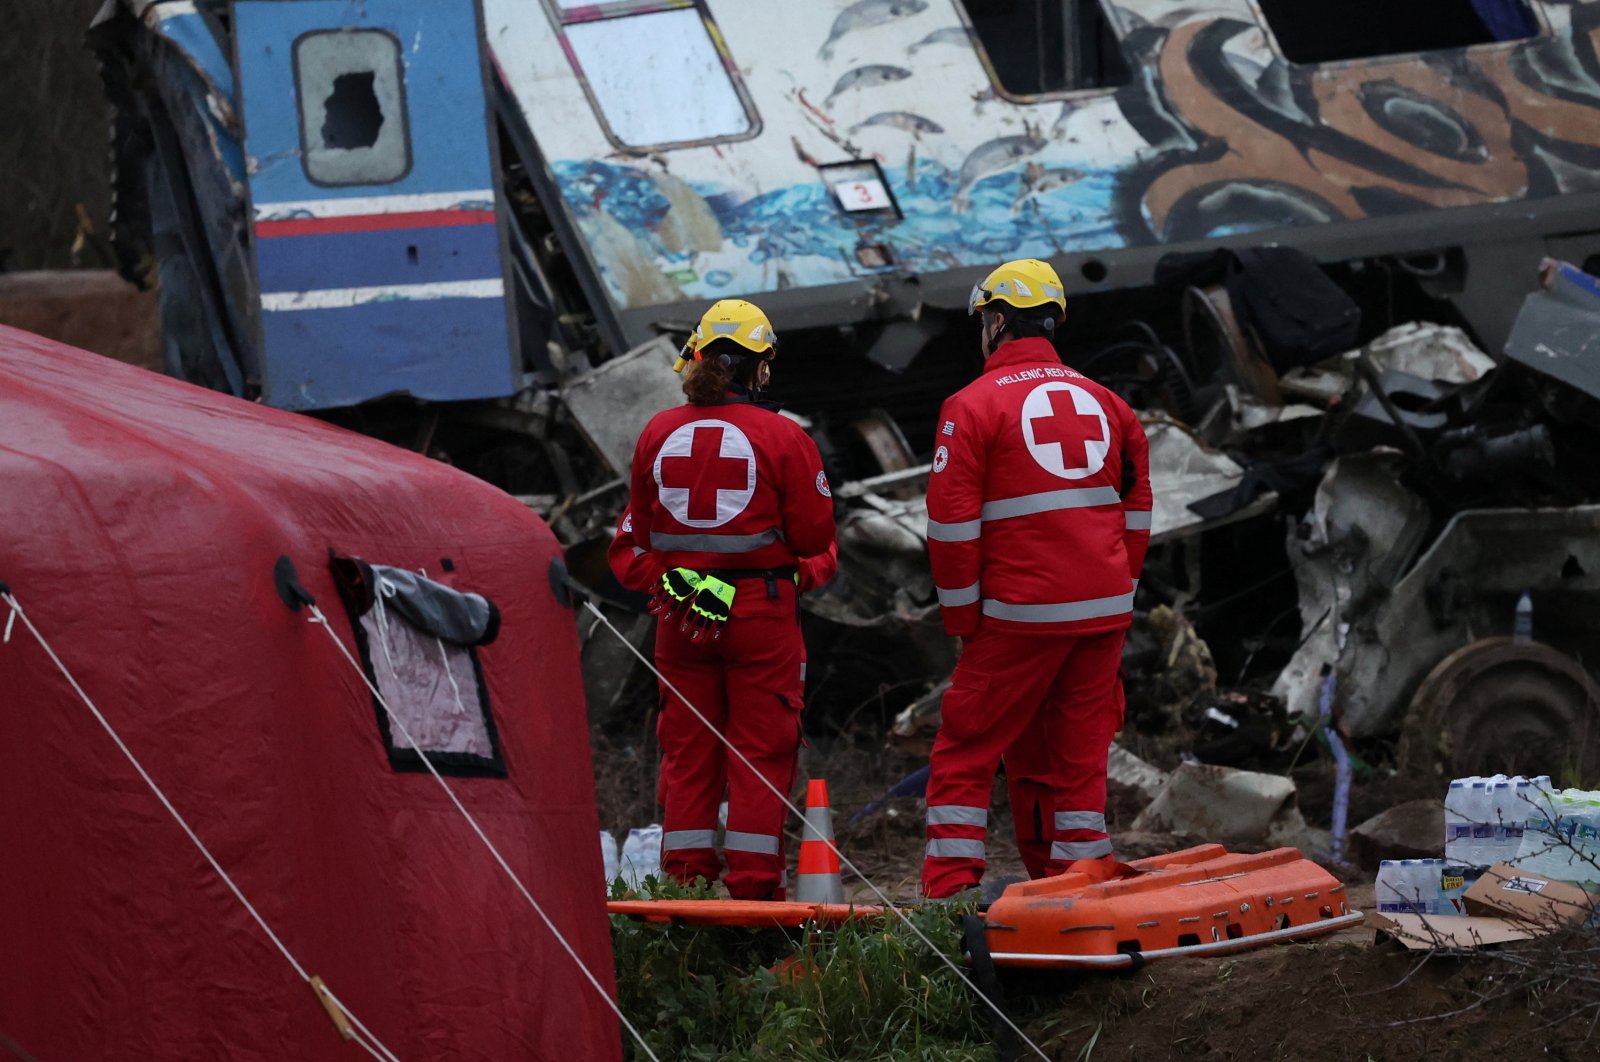 Rescuers operate on the site of a train crash, Larissa, Greece, March 2, 2023. (Reuters Photo)